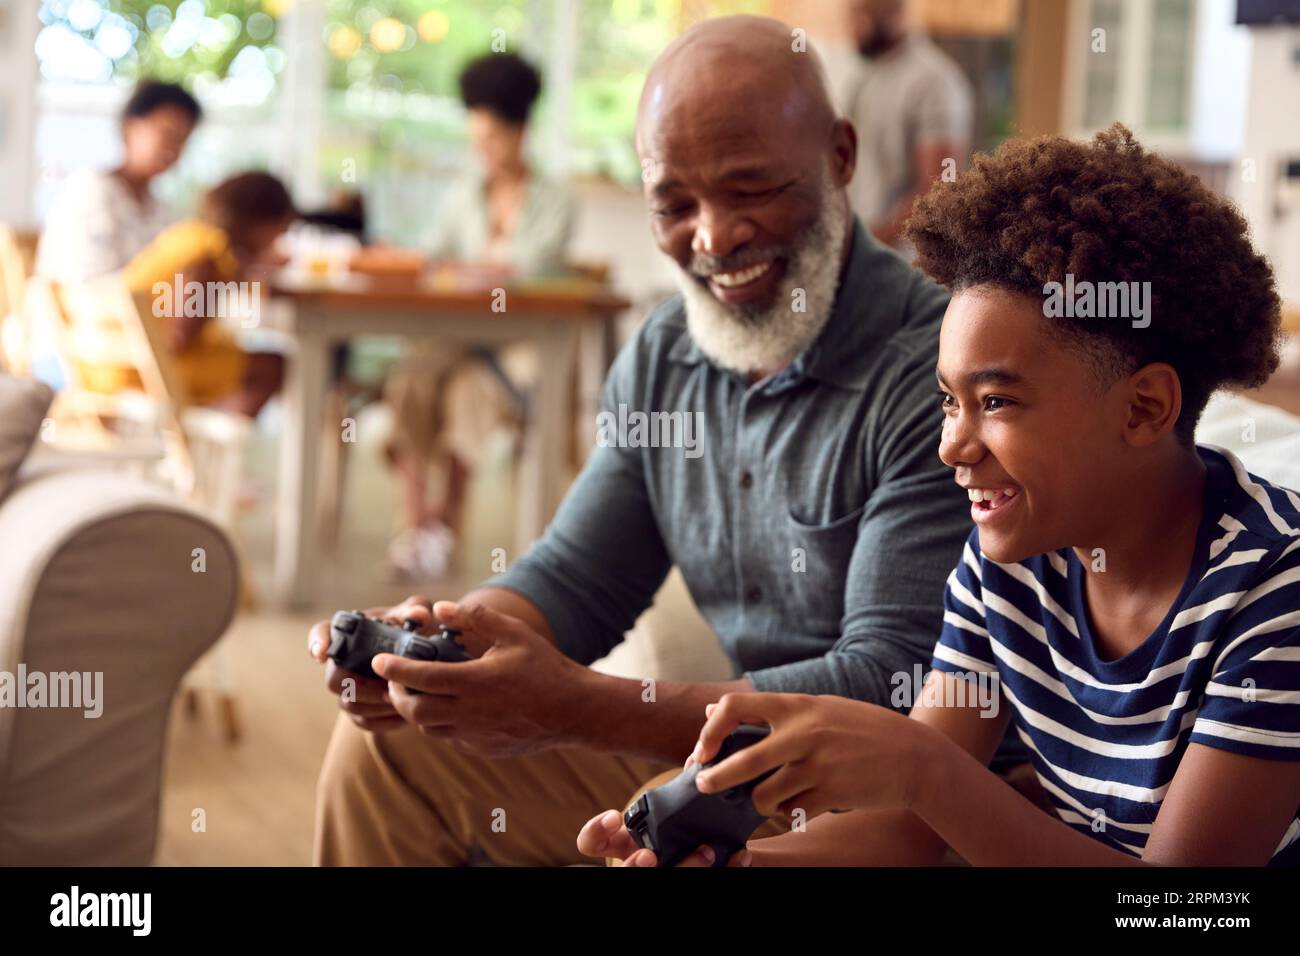 Grandfather And Grandson Sitting On Sofa At Home Playing Video Game Together Stock Photo